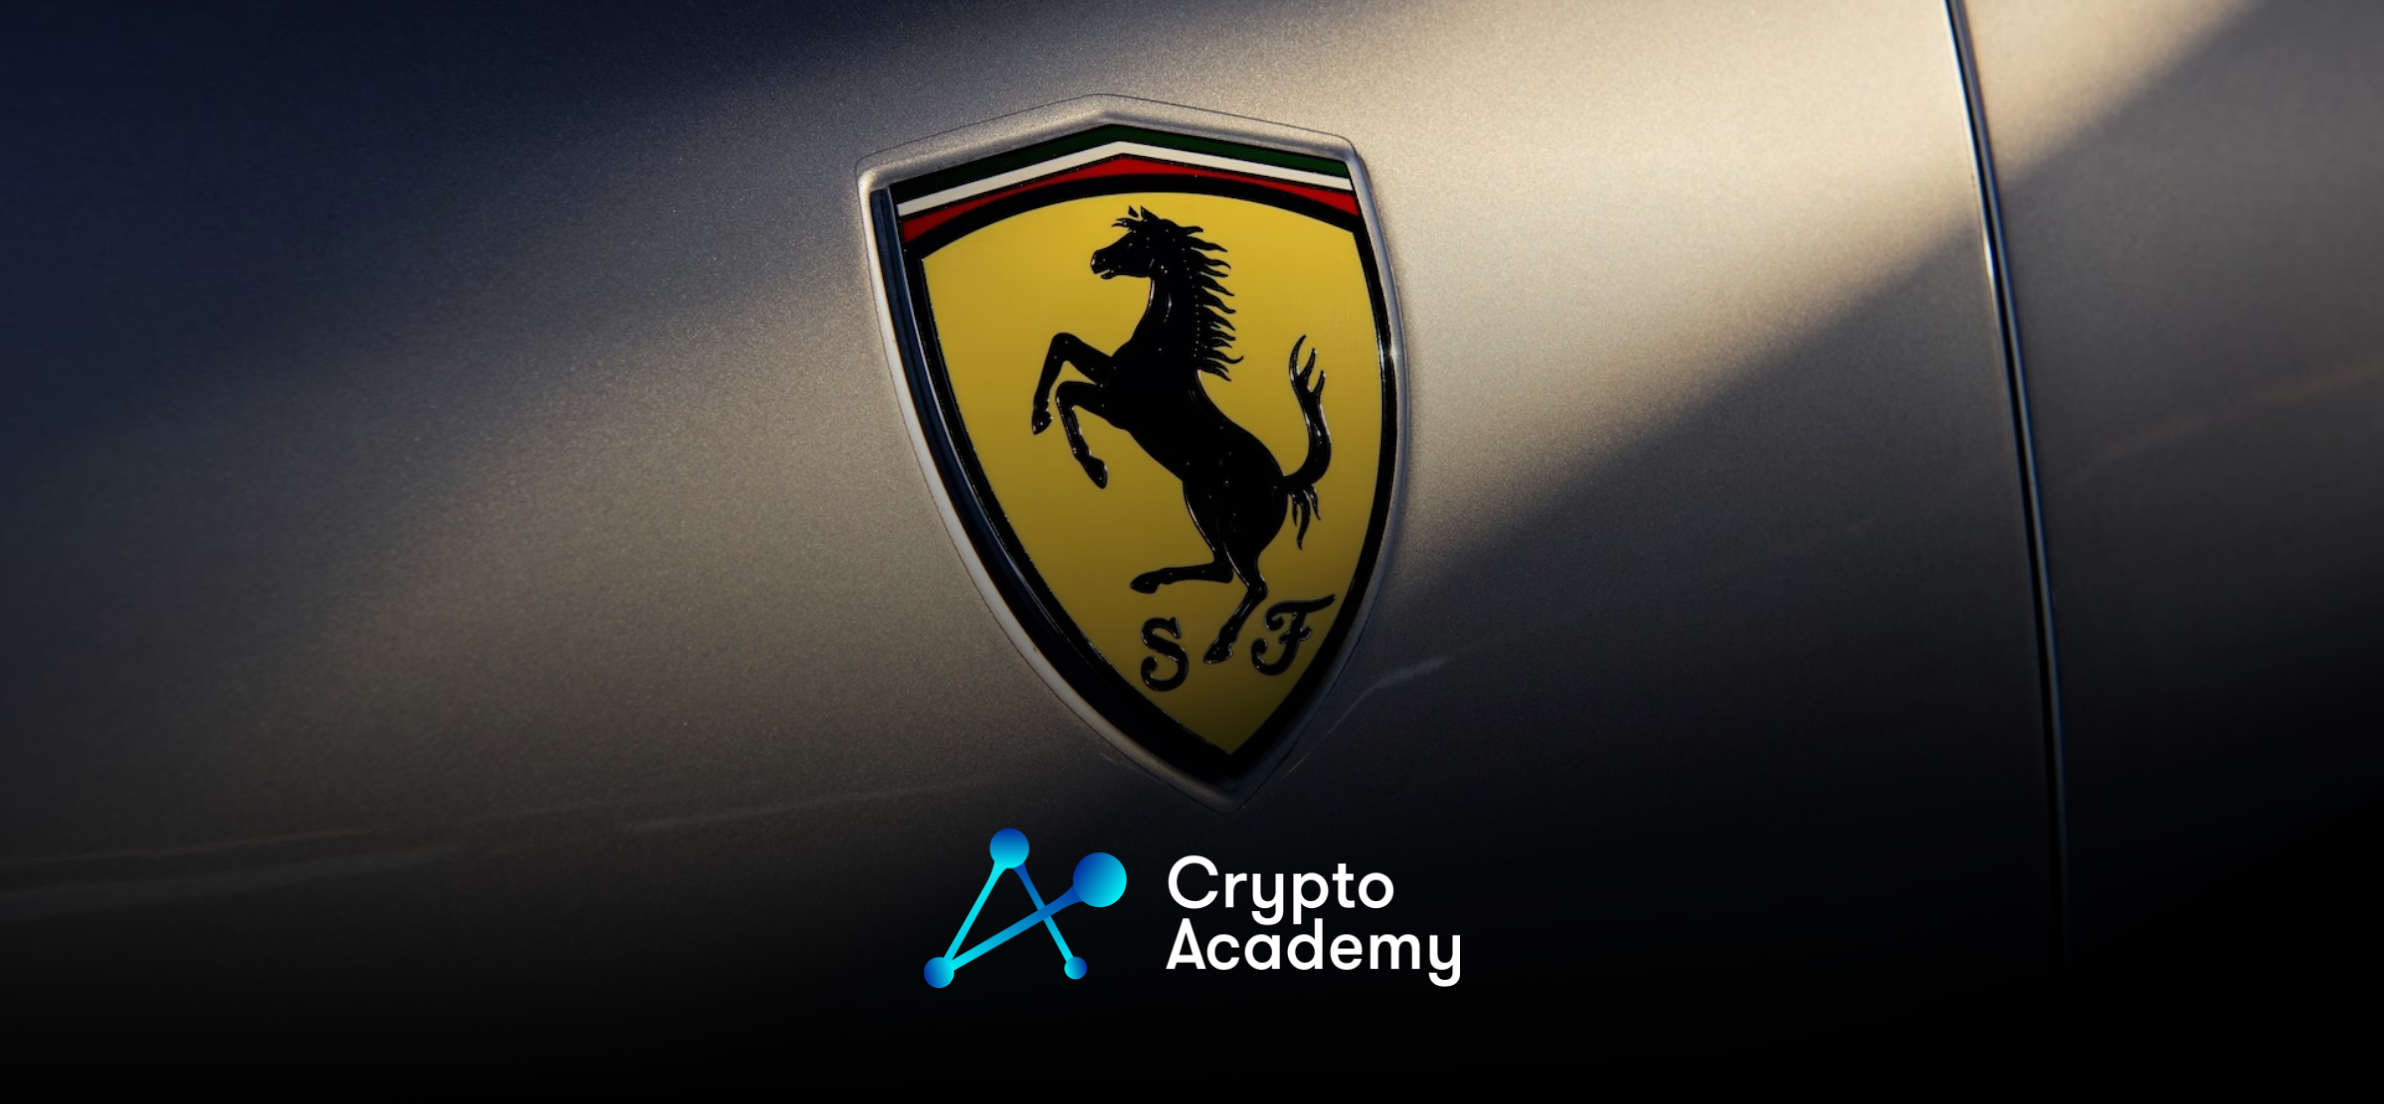 Ferrari Adds Crypto as a Payment Method